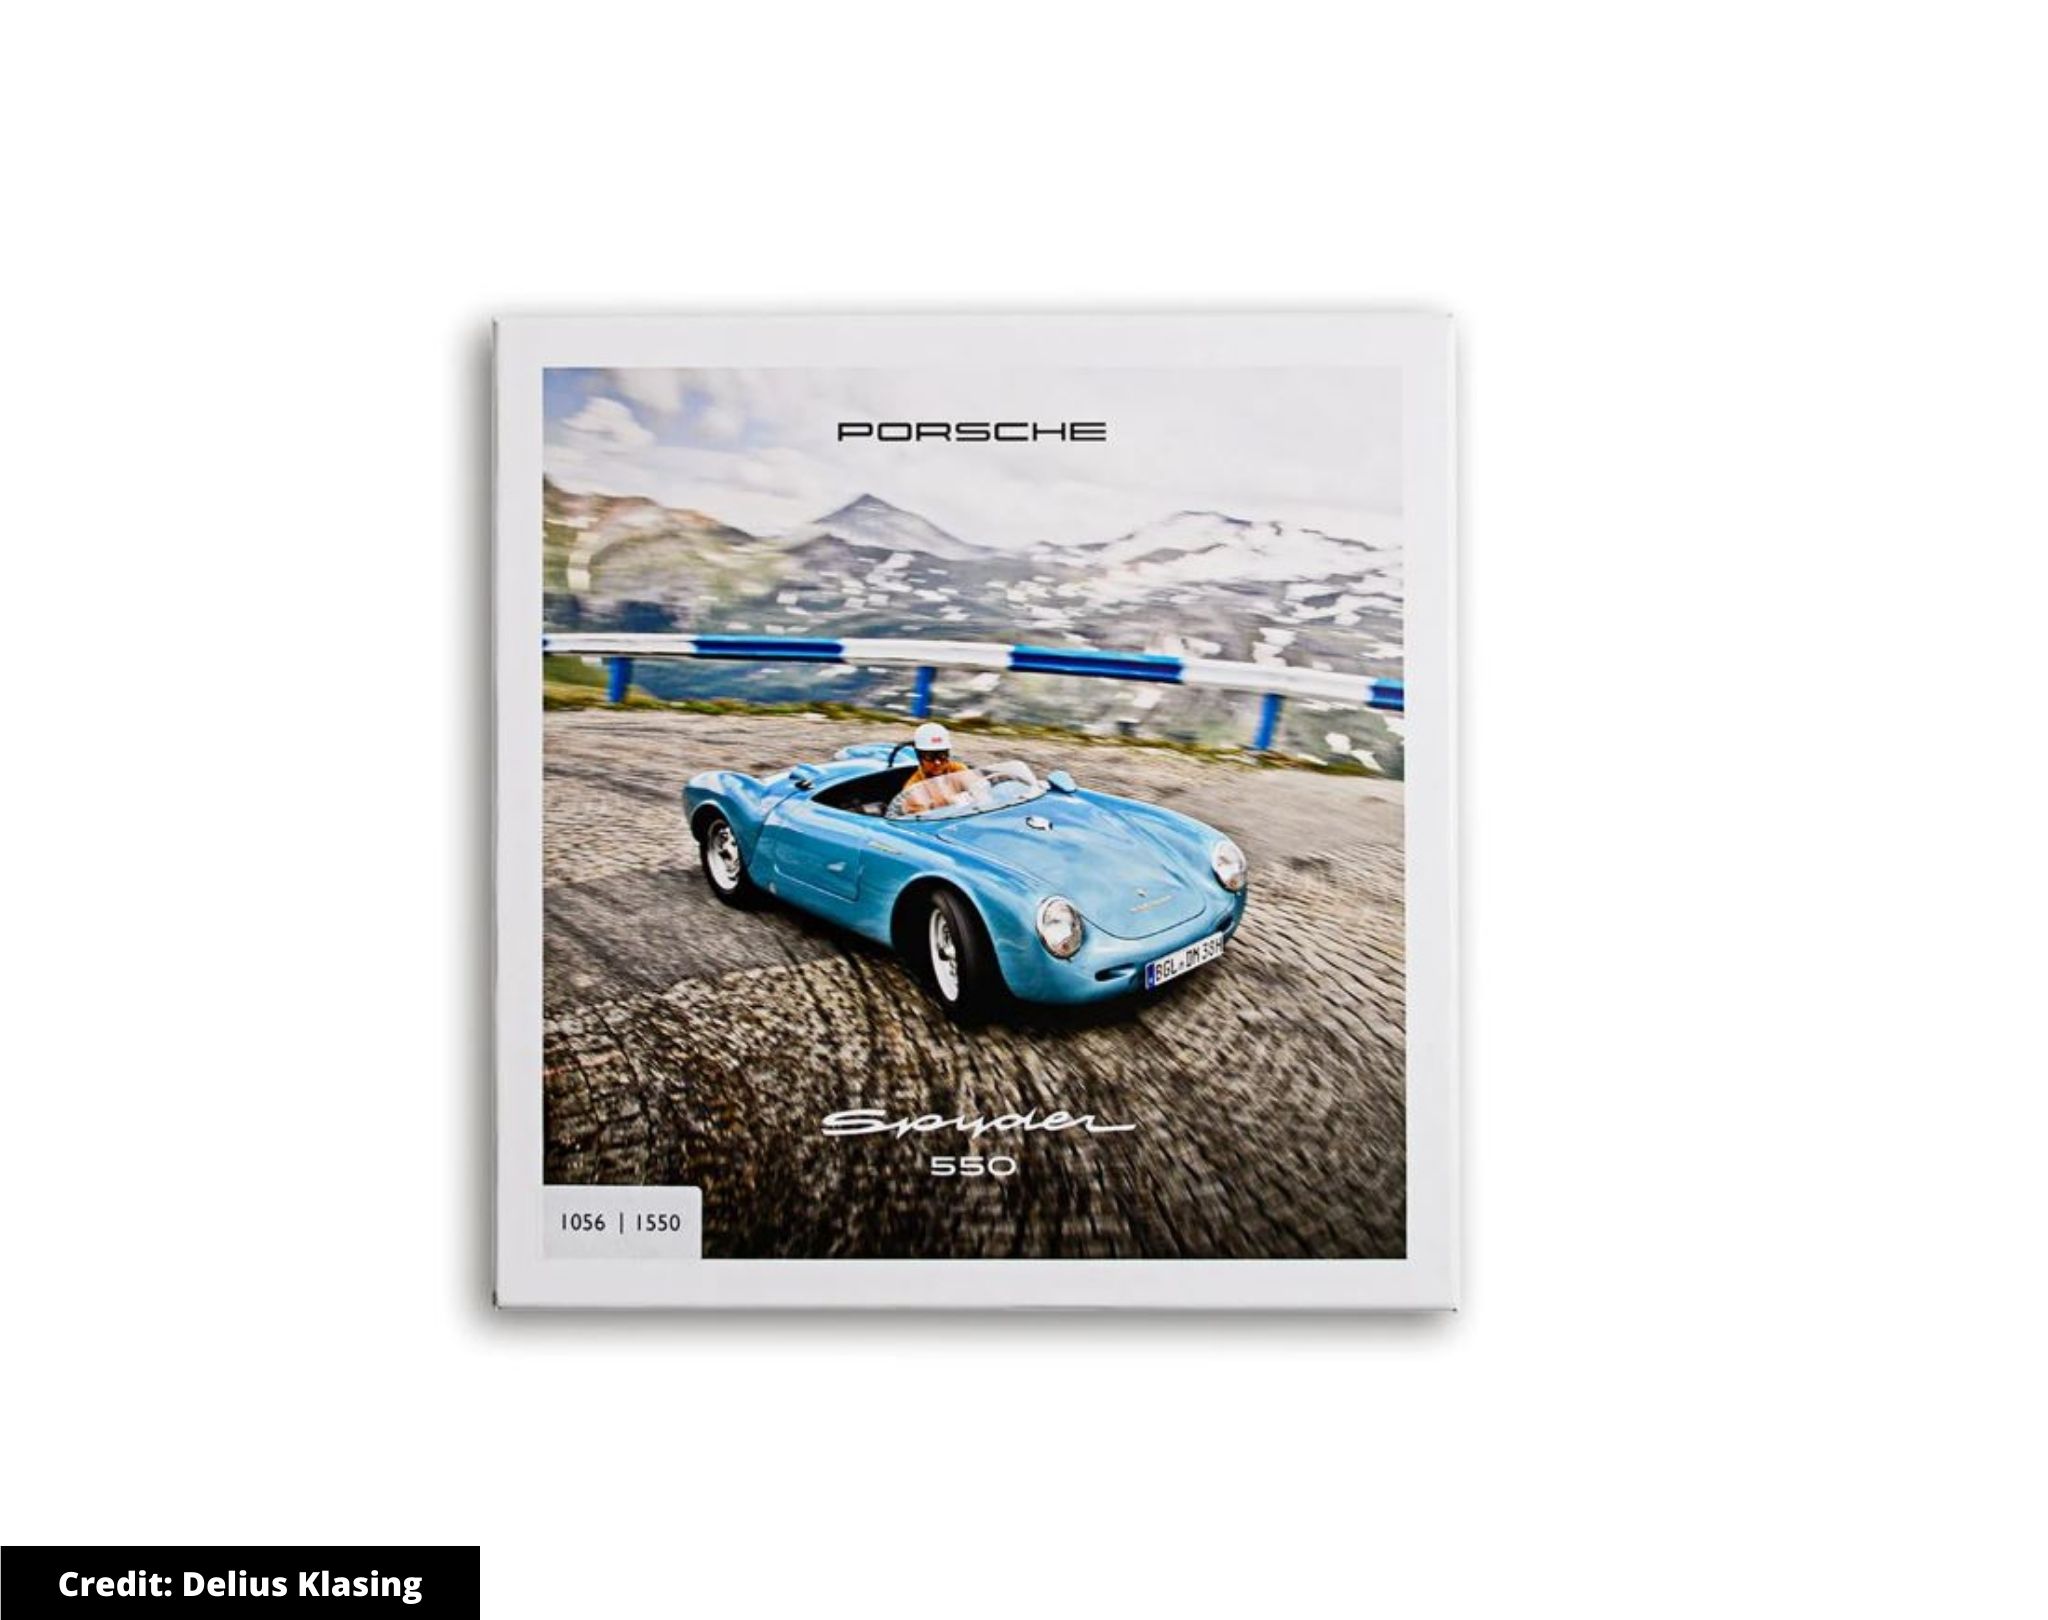 Book on the history of Porsche